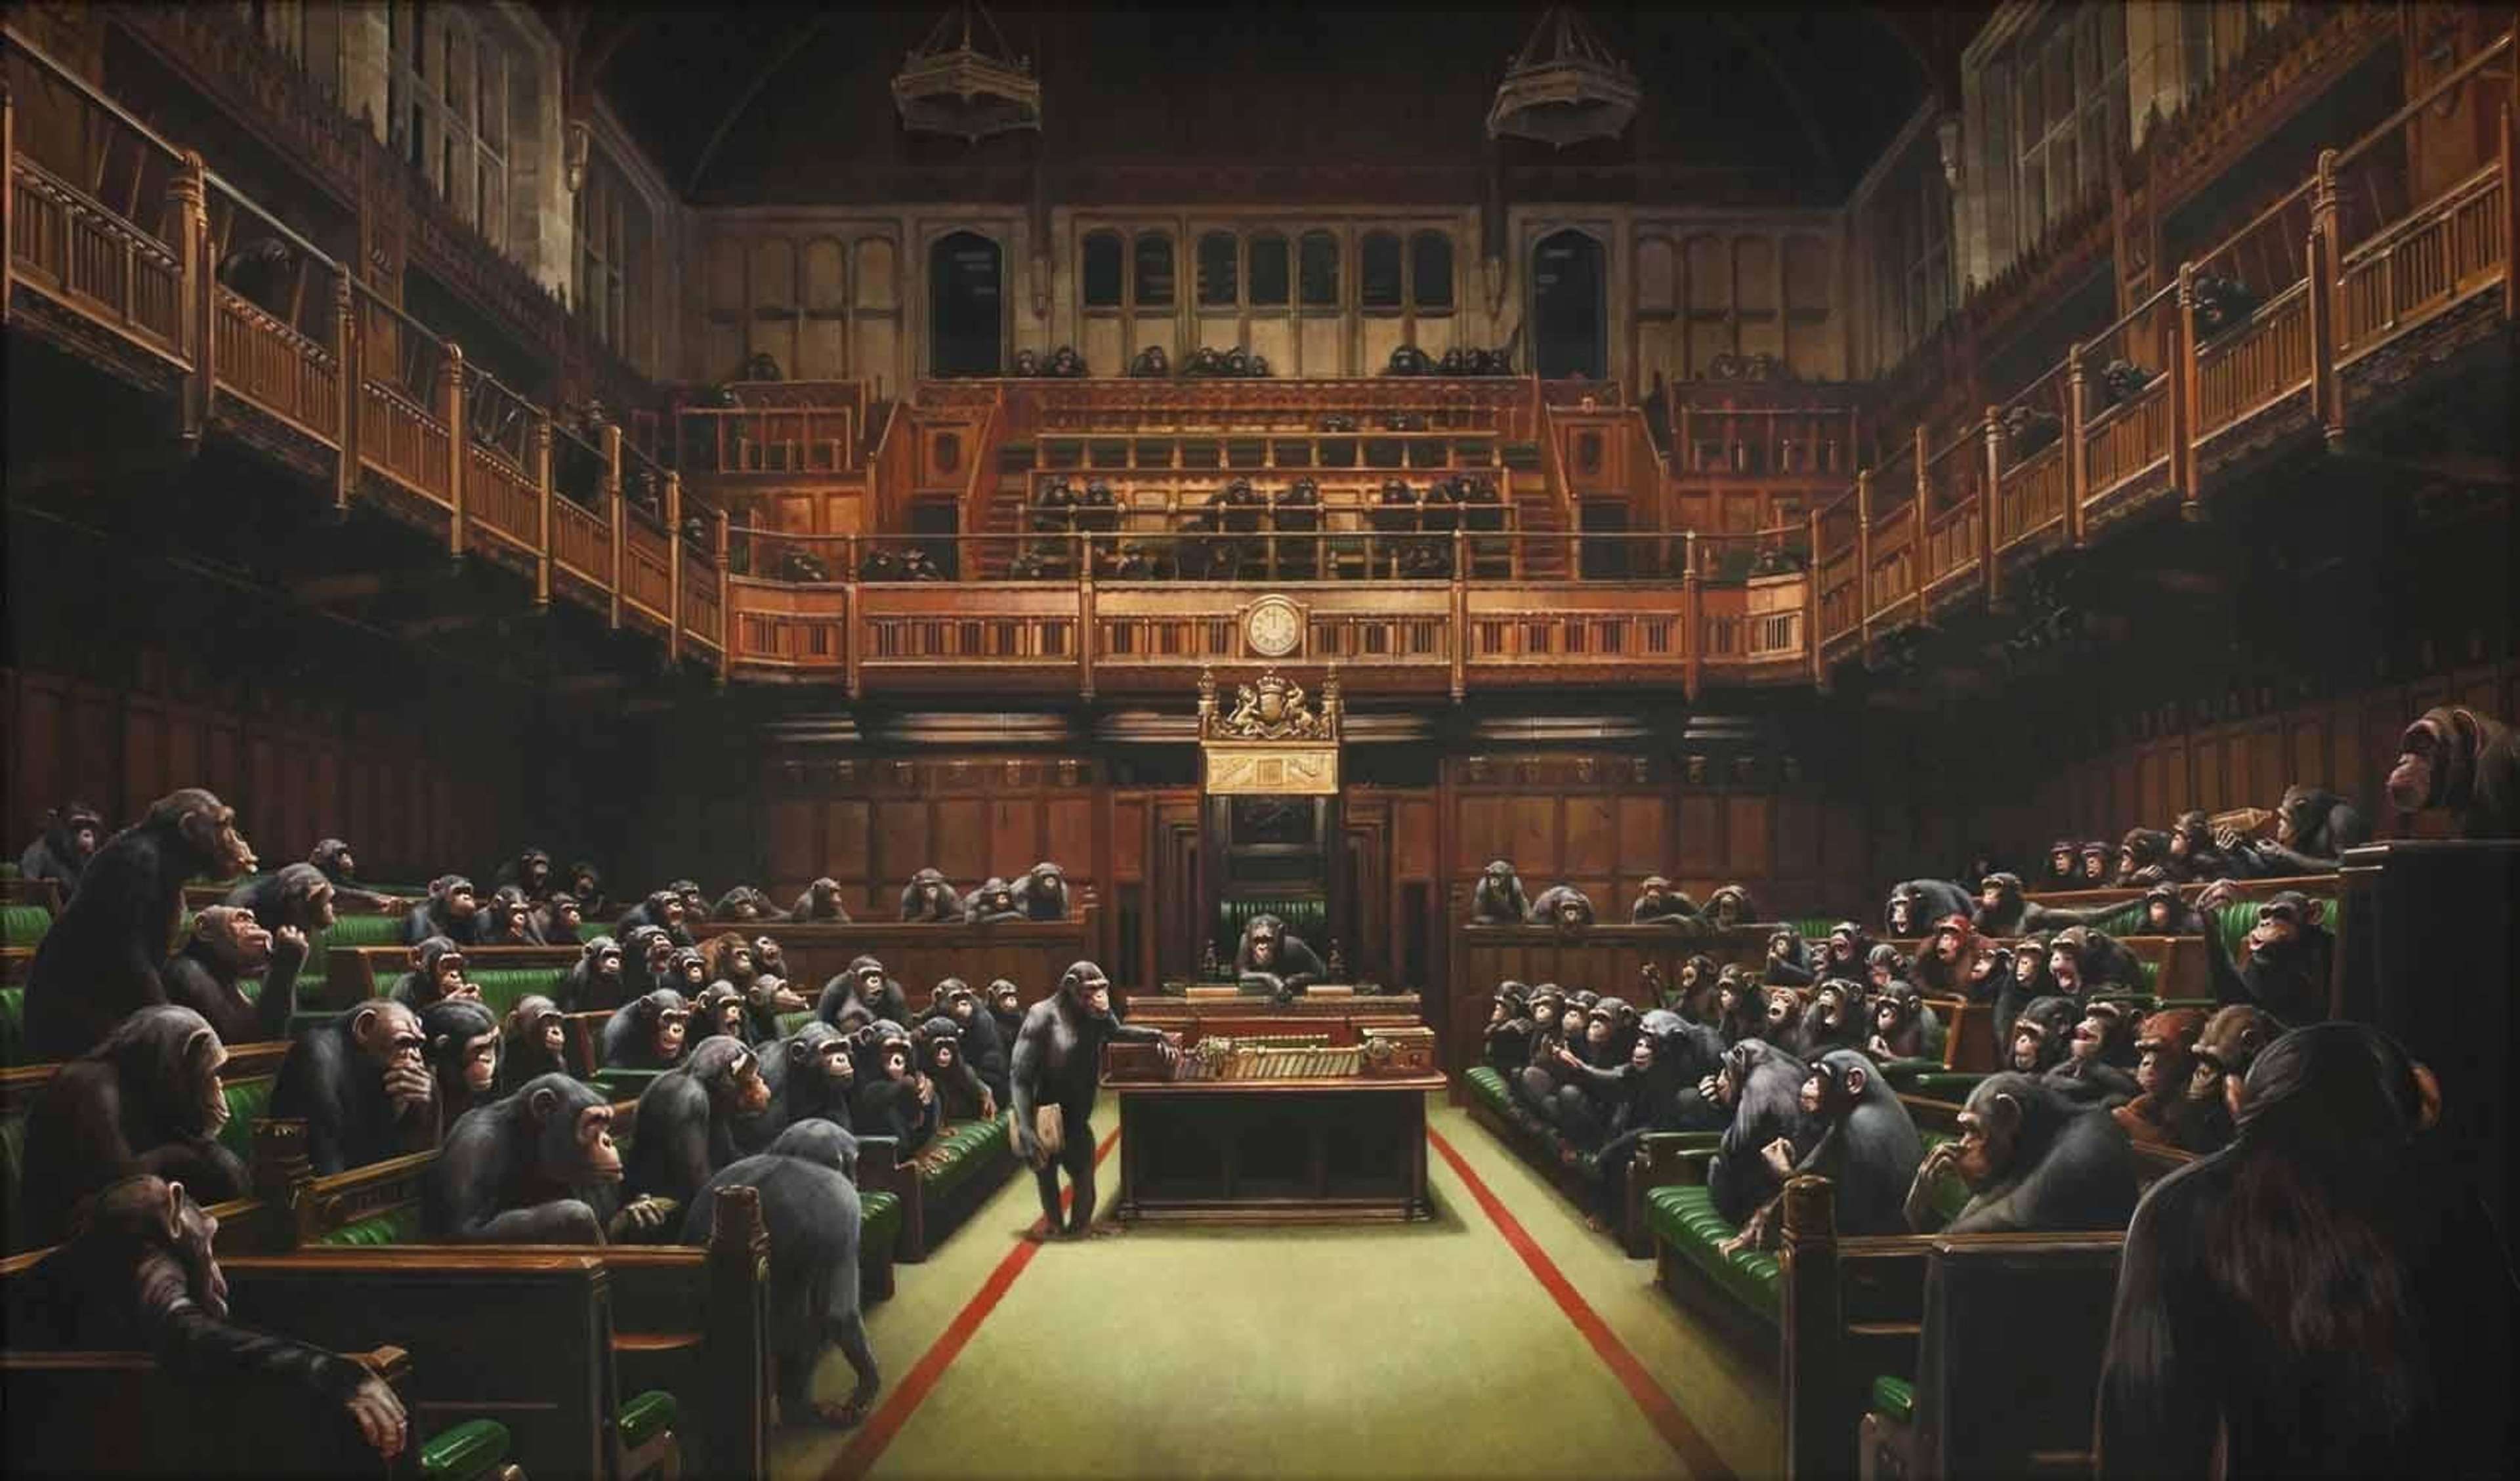 Banksy’s Devolved Parliament, 2009. An oil on canvas work with chimpanzees in the House of Commons.